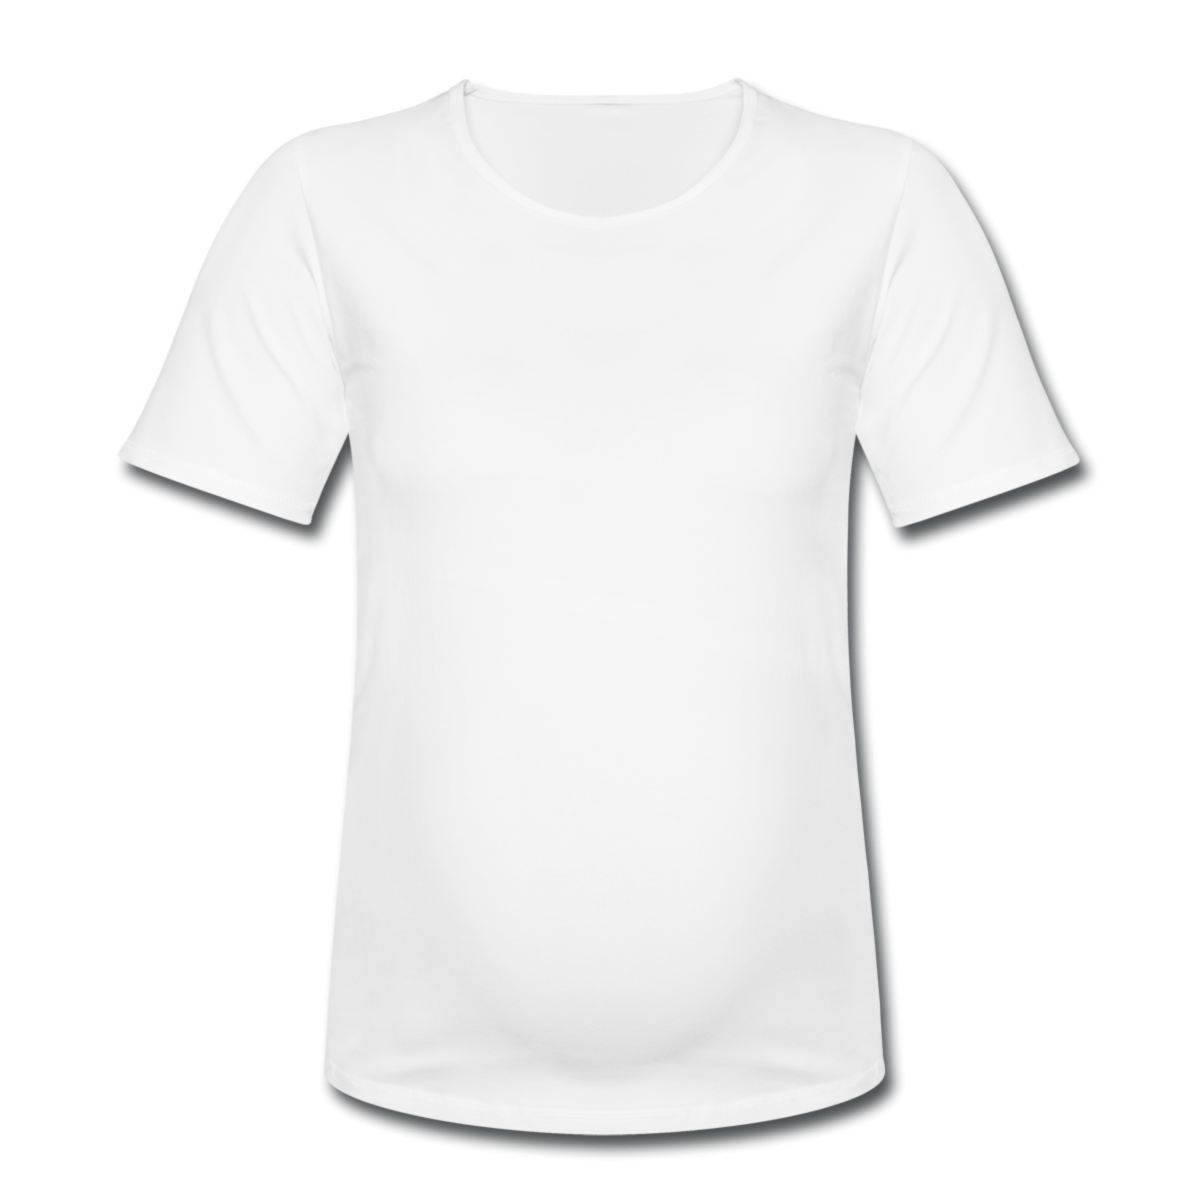 Free Blank T Shirts, Download Free Blank T Shirts png images, Free ...